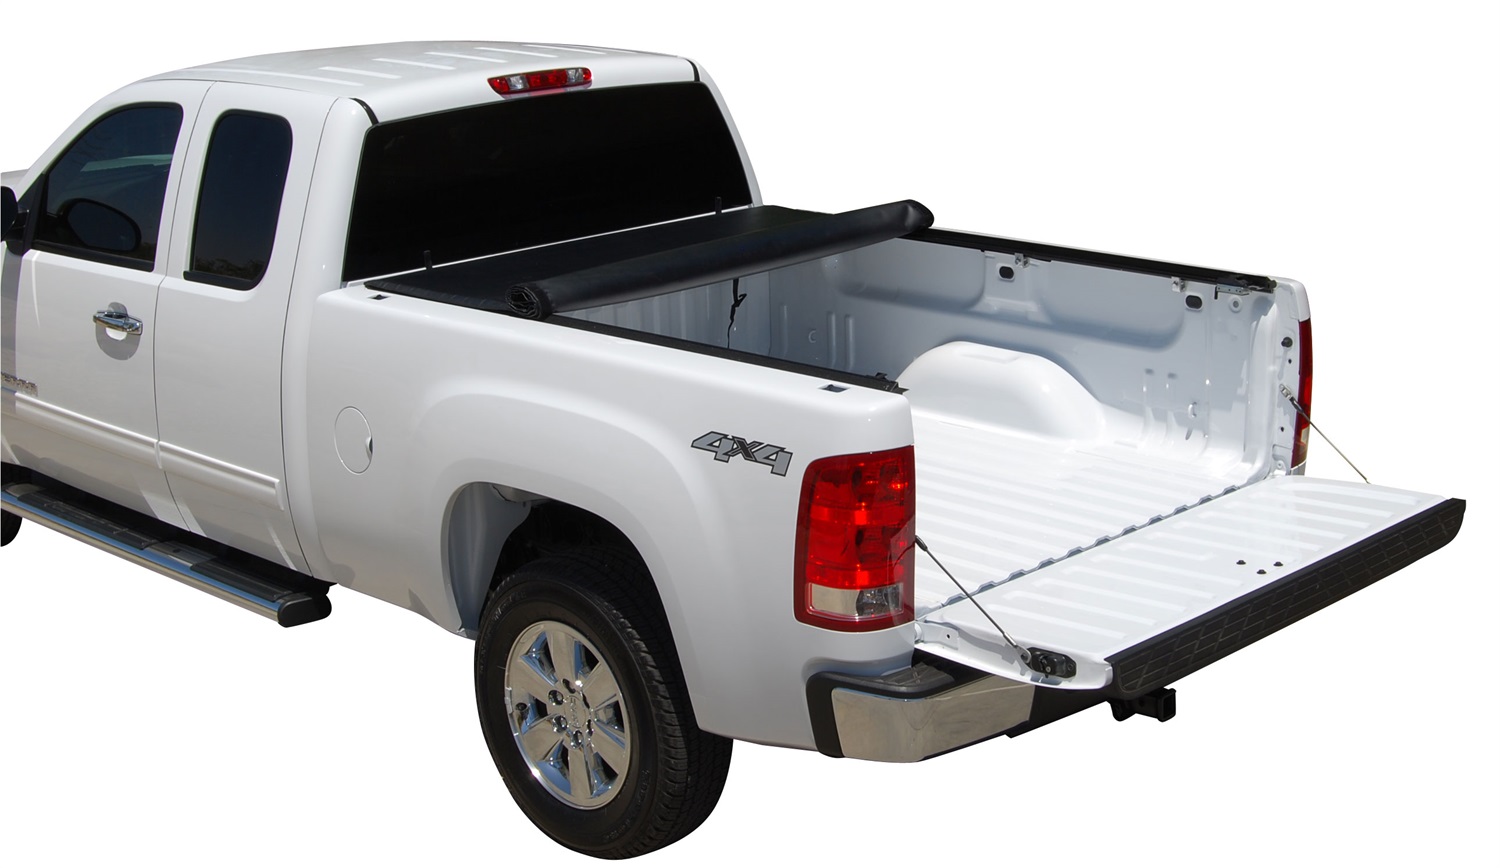 Tonno Pro Roll Up Cover fits Dodge Ram 1500 5.8' Bed Crew Cab LR-2020 | eBay 2020 Ram 1500 Crew Cab Bed Cover